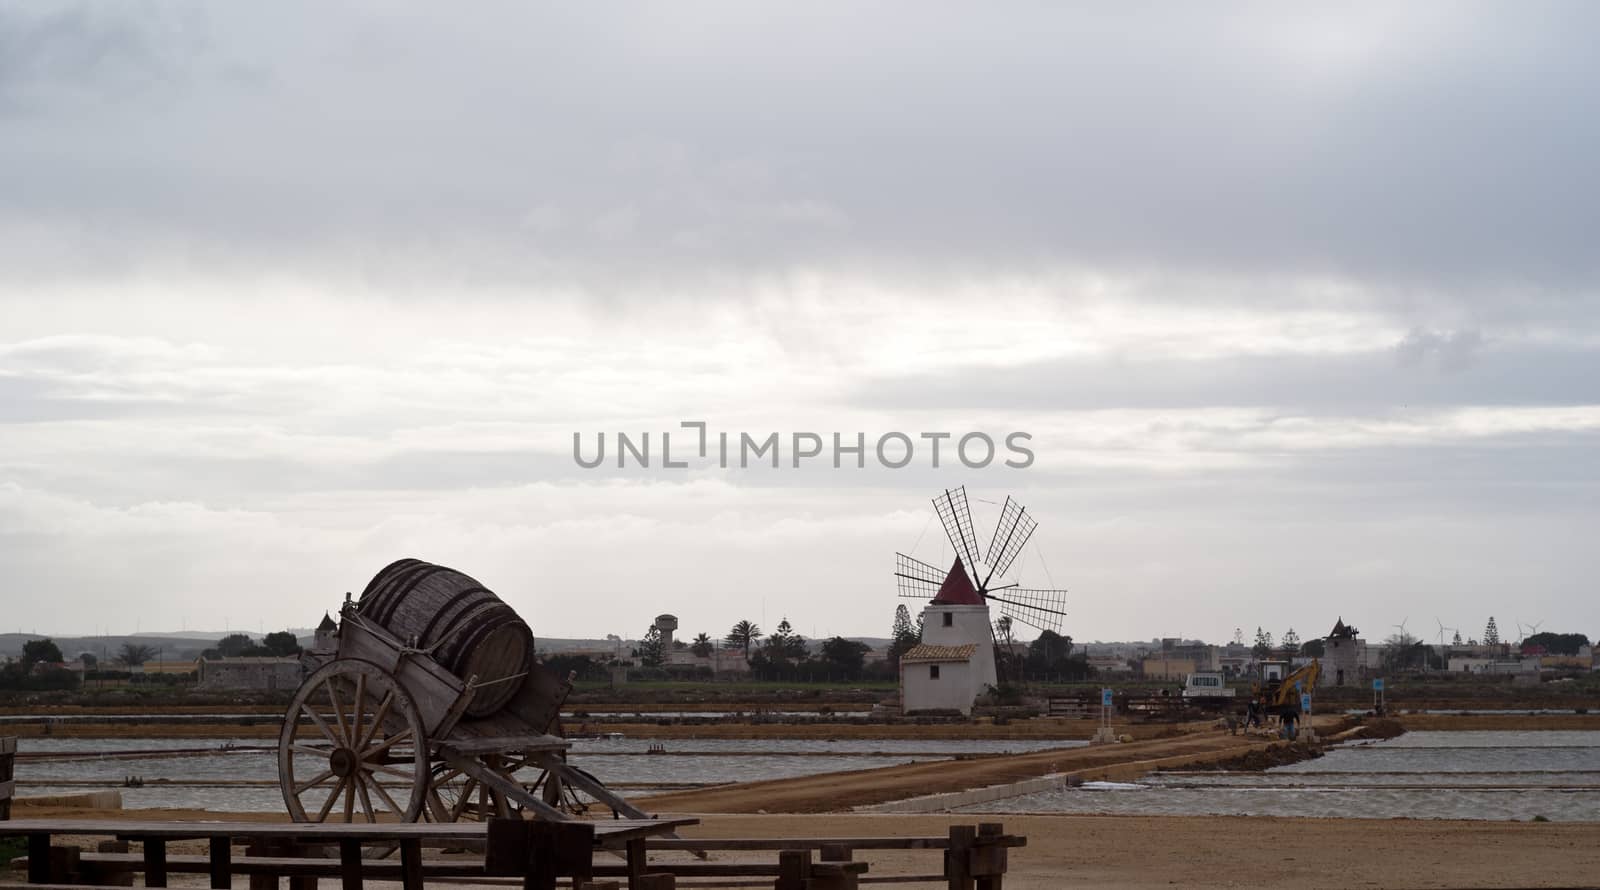 Old windmill on the salines near trapani with lake and bridge